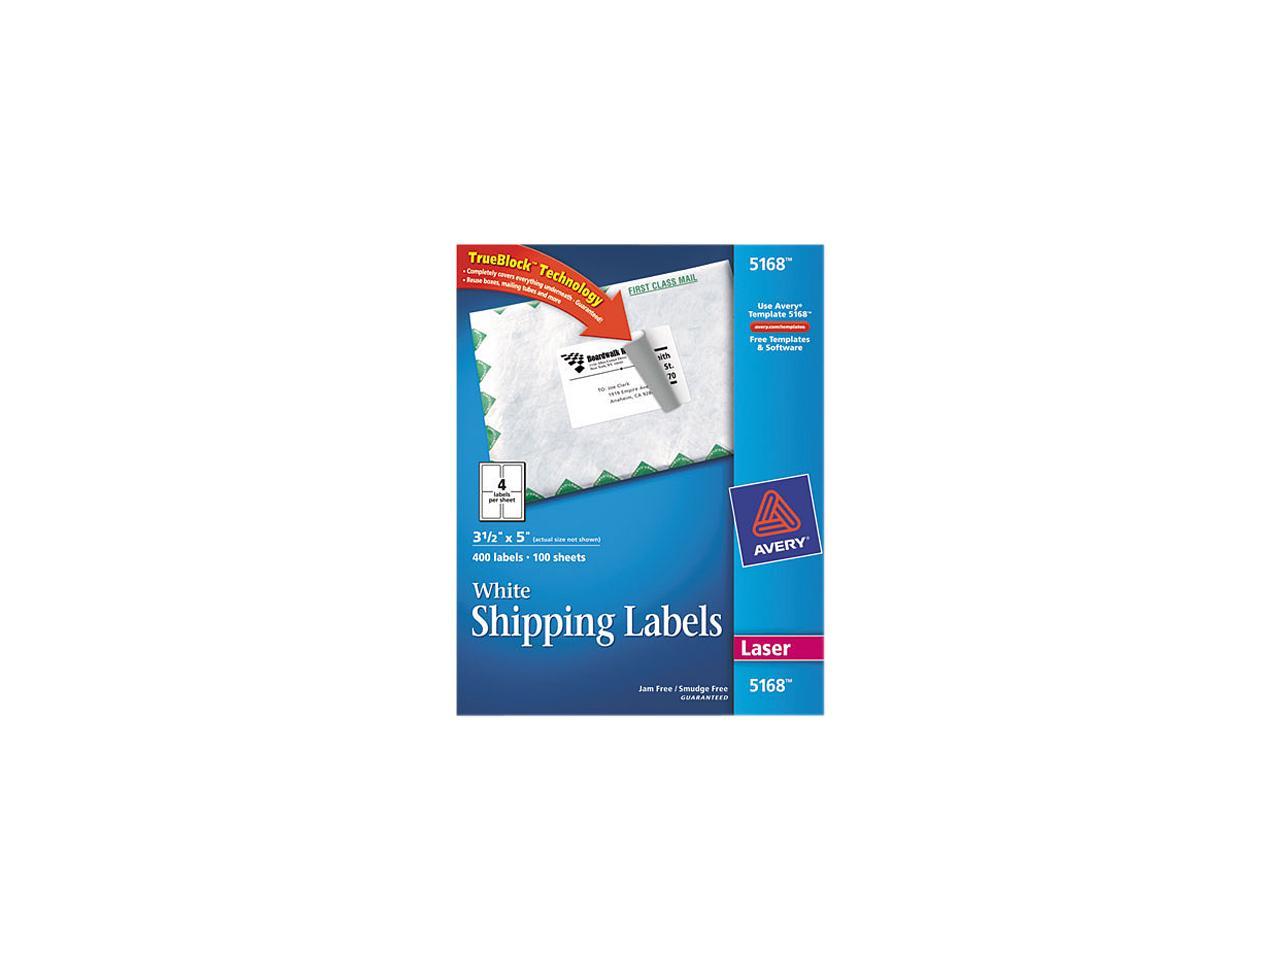 Avery 5168 Labels With, How To Print Avery 5168 Labels Landscape